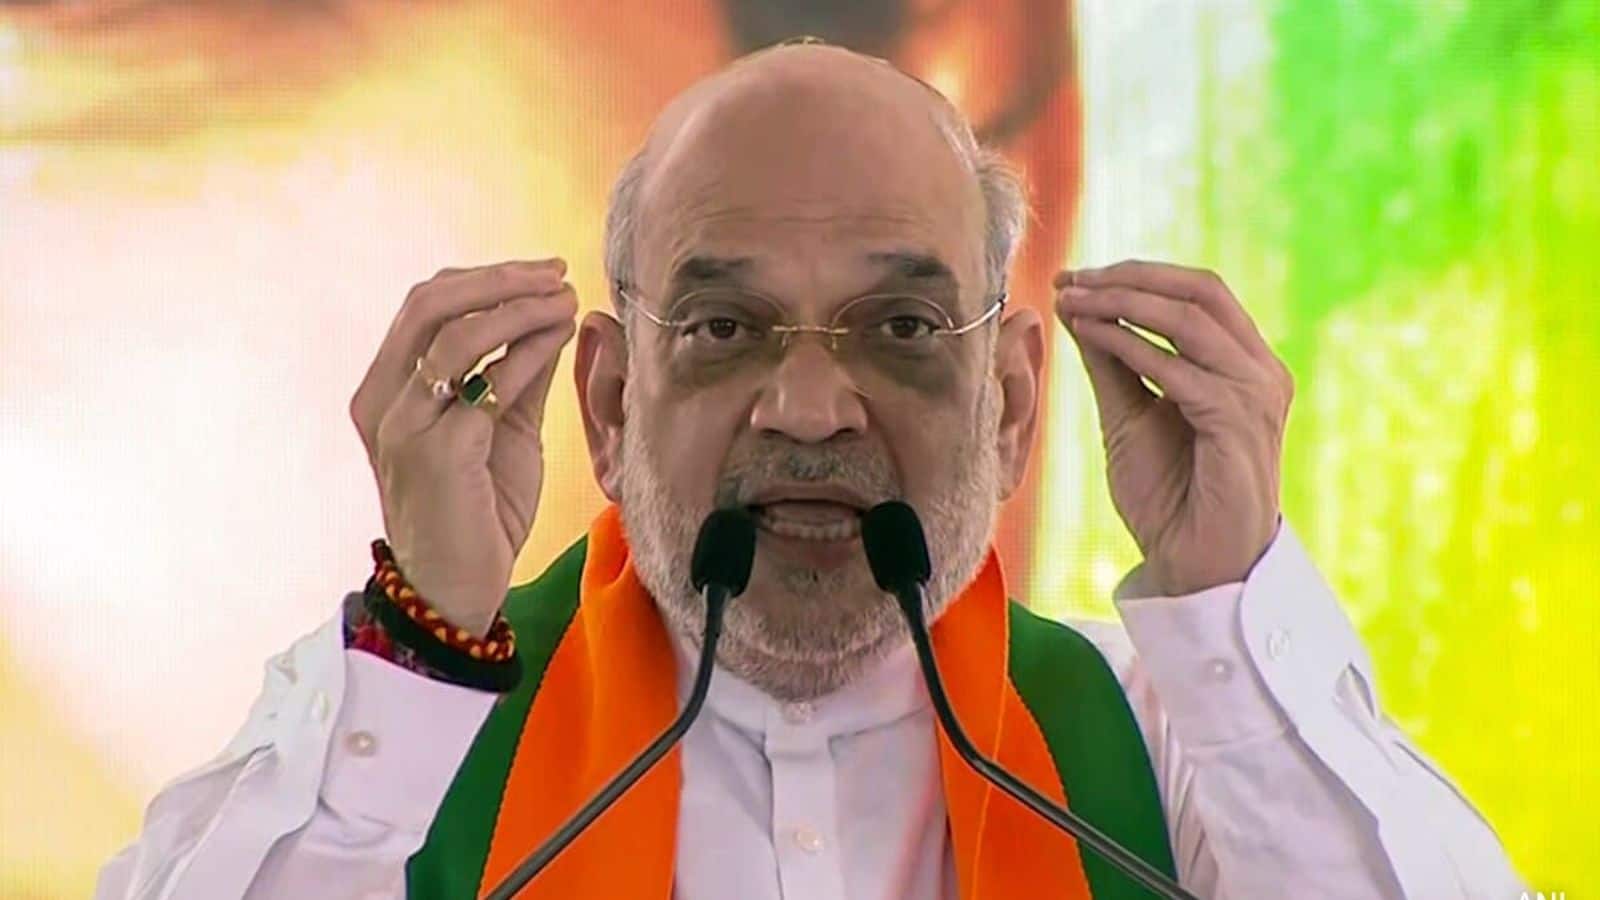 FIR filed over Amit Shah's doctored video on SC/ST quotas